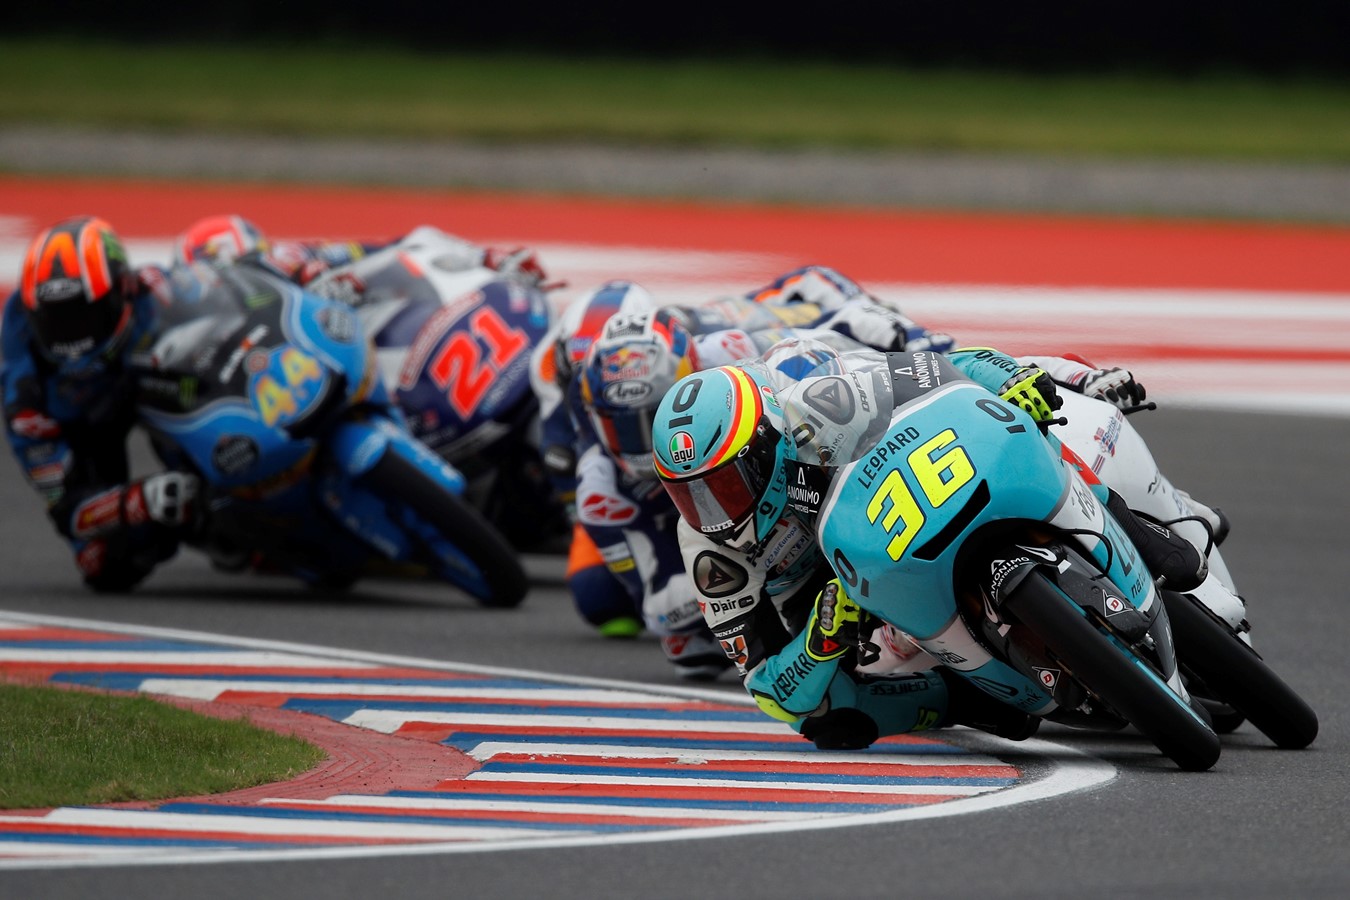 Honda riders monopolised the Moto3 podium for the second race in a row